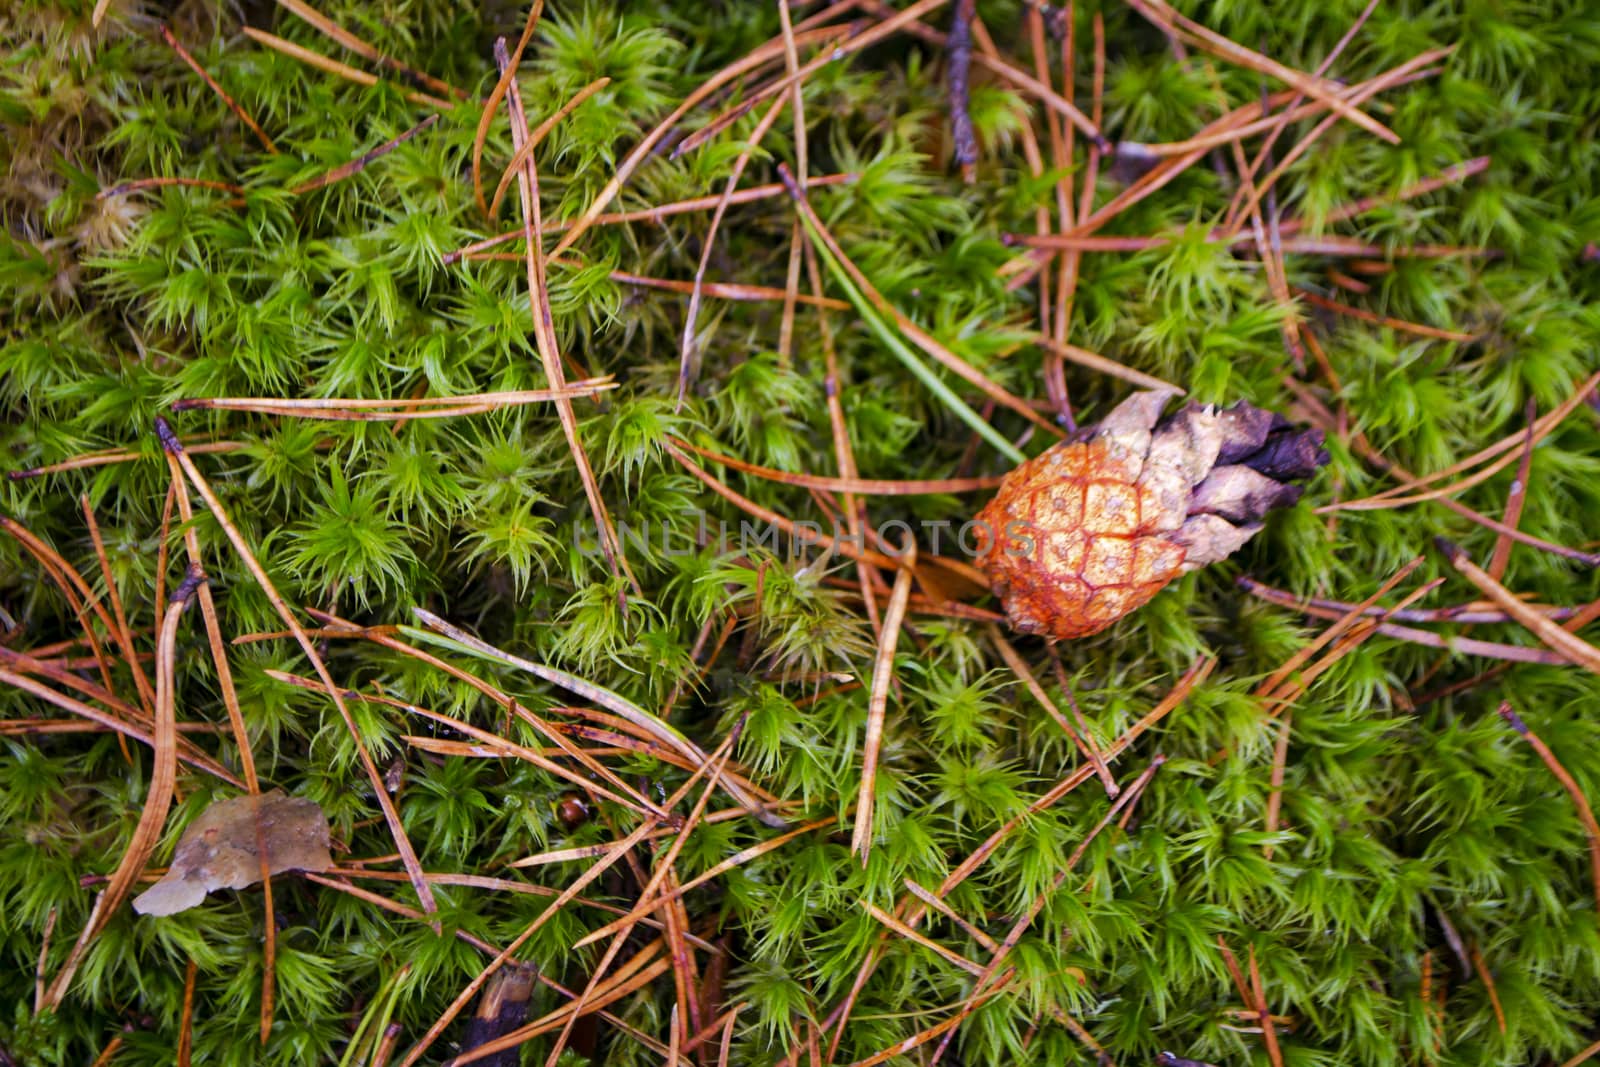 Red pine cone on green moss in a pine forest close up, flat lay